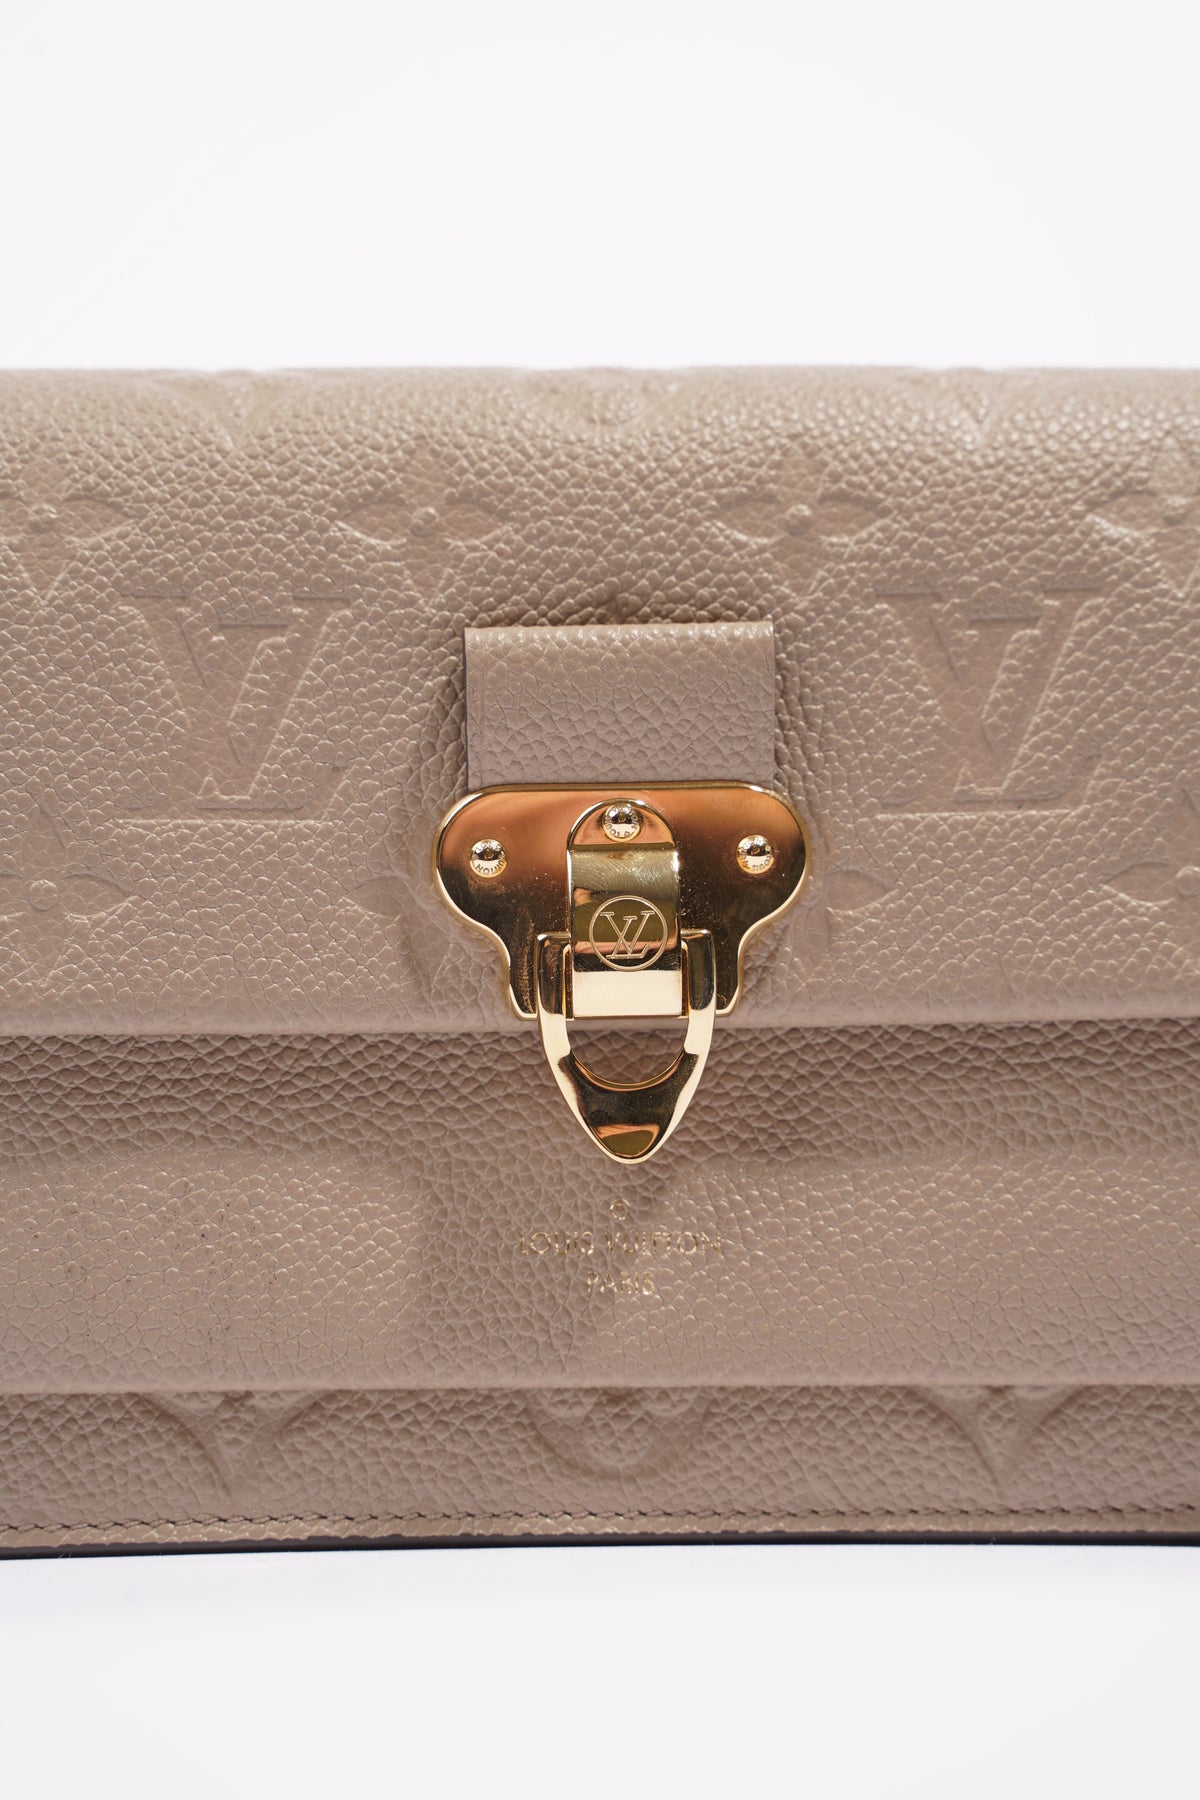 lv vavin chain wallet review